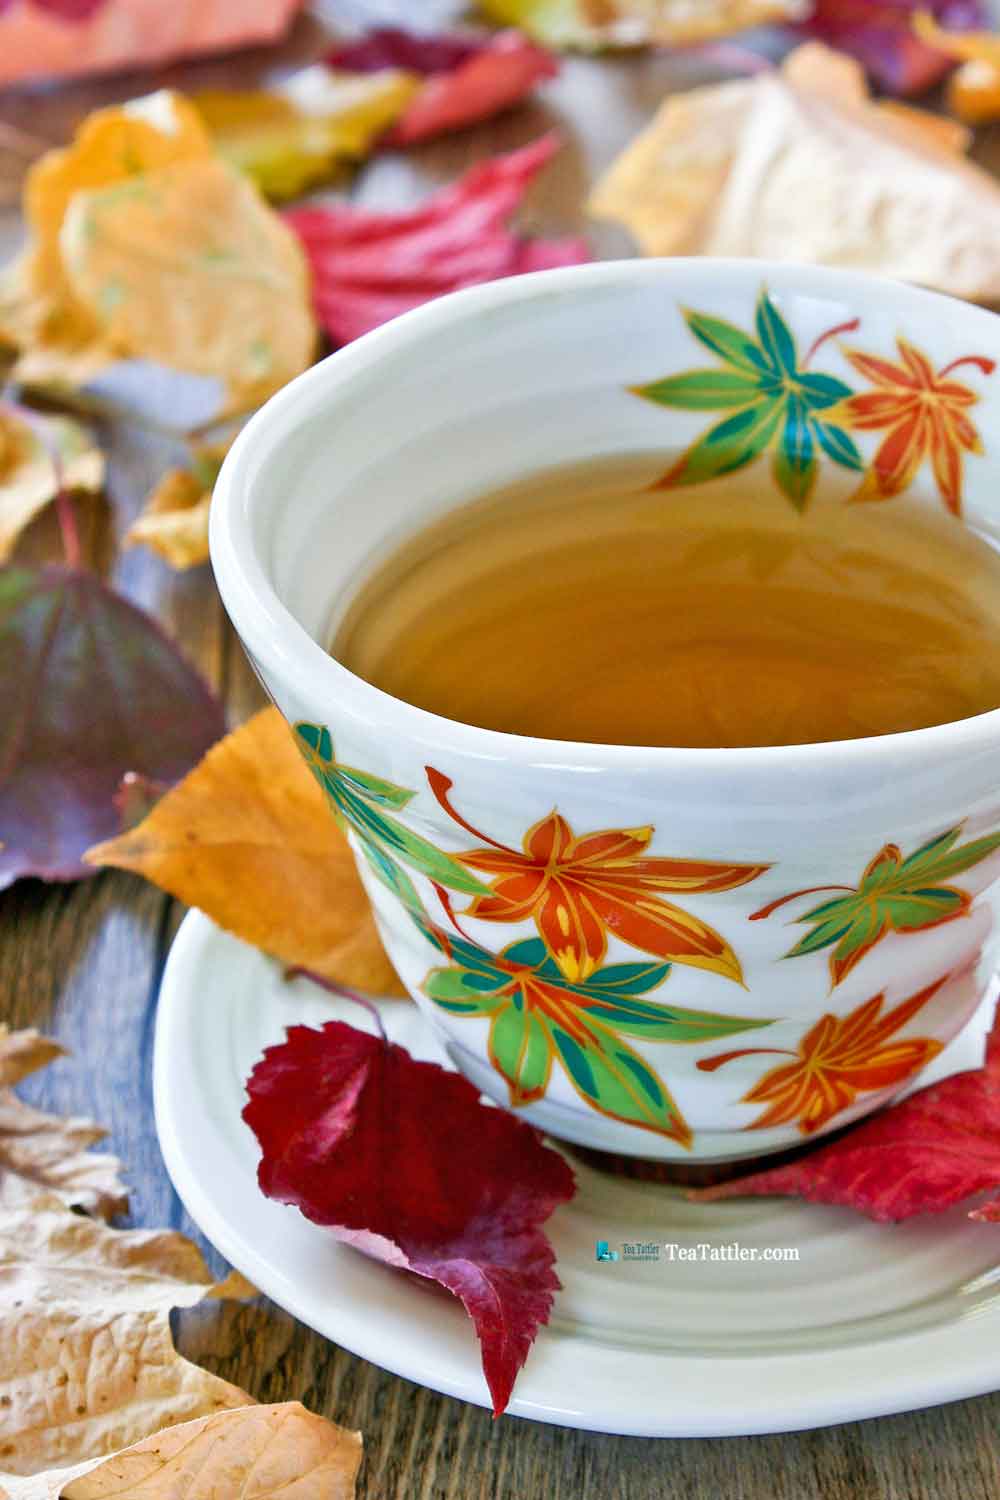 Autumn Tea - poem and musings of the changing seasons with pictures of the fiery autumn landscape with shades of gold to rich mauve. | TeaTattler.com #autumntea #autumn #changingseasons